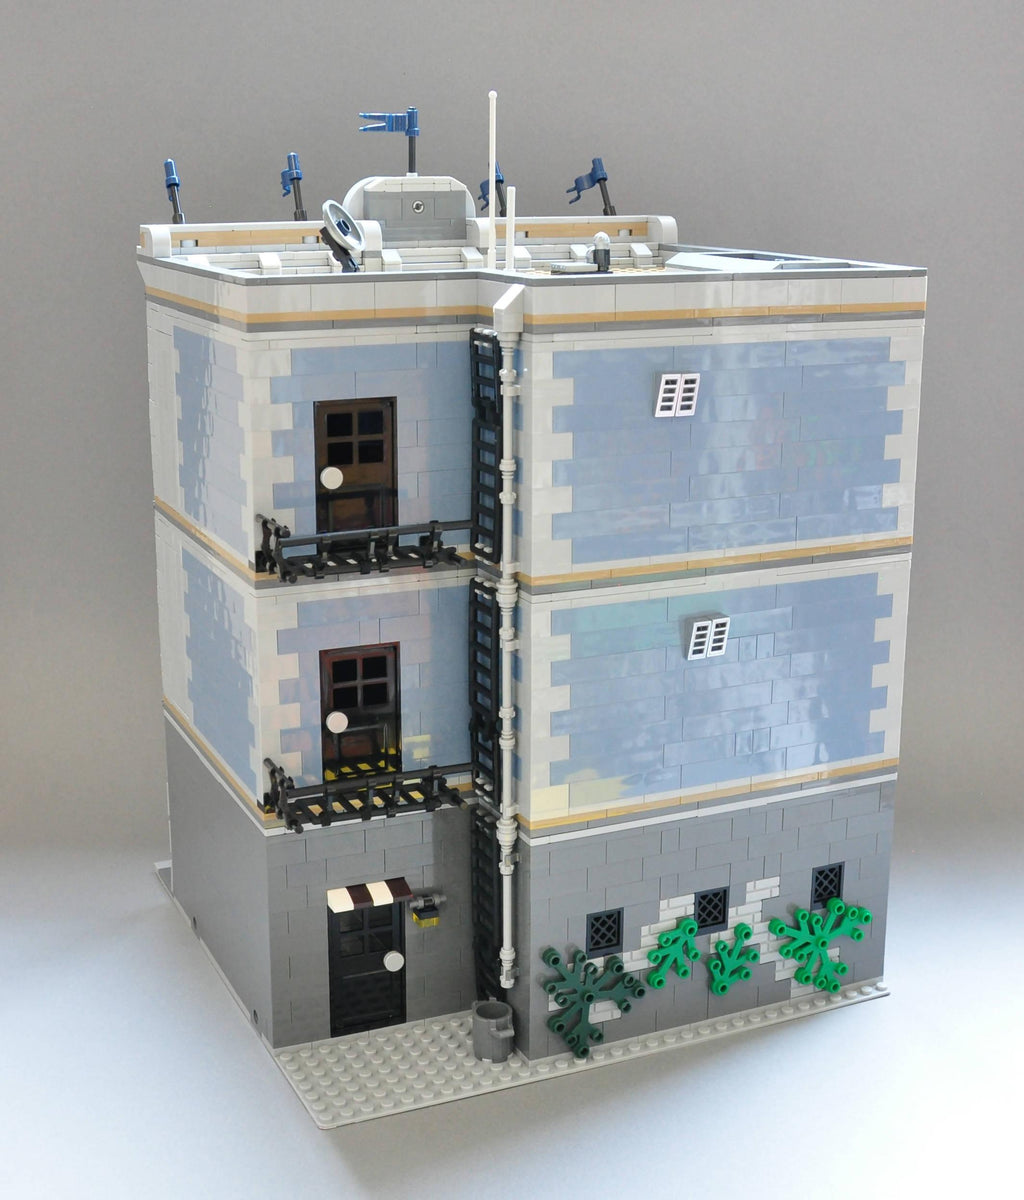 Police Station Modular Building - About Us 